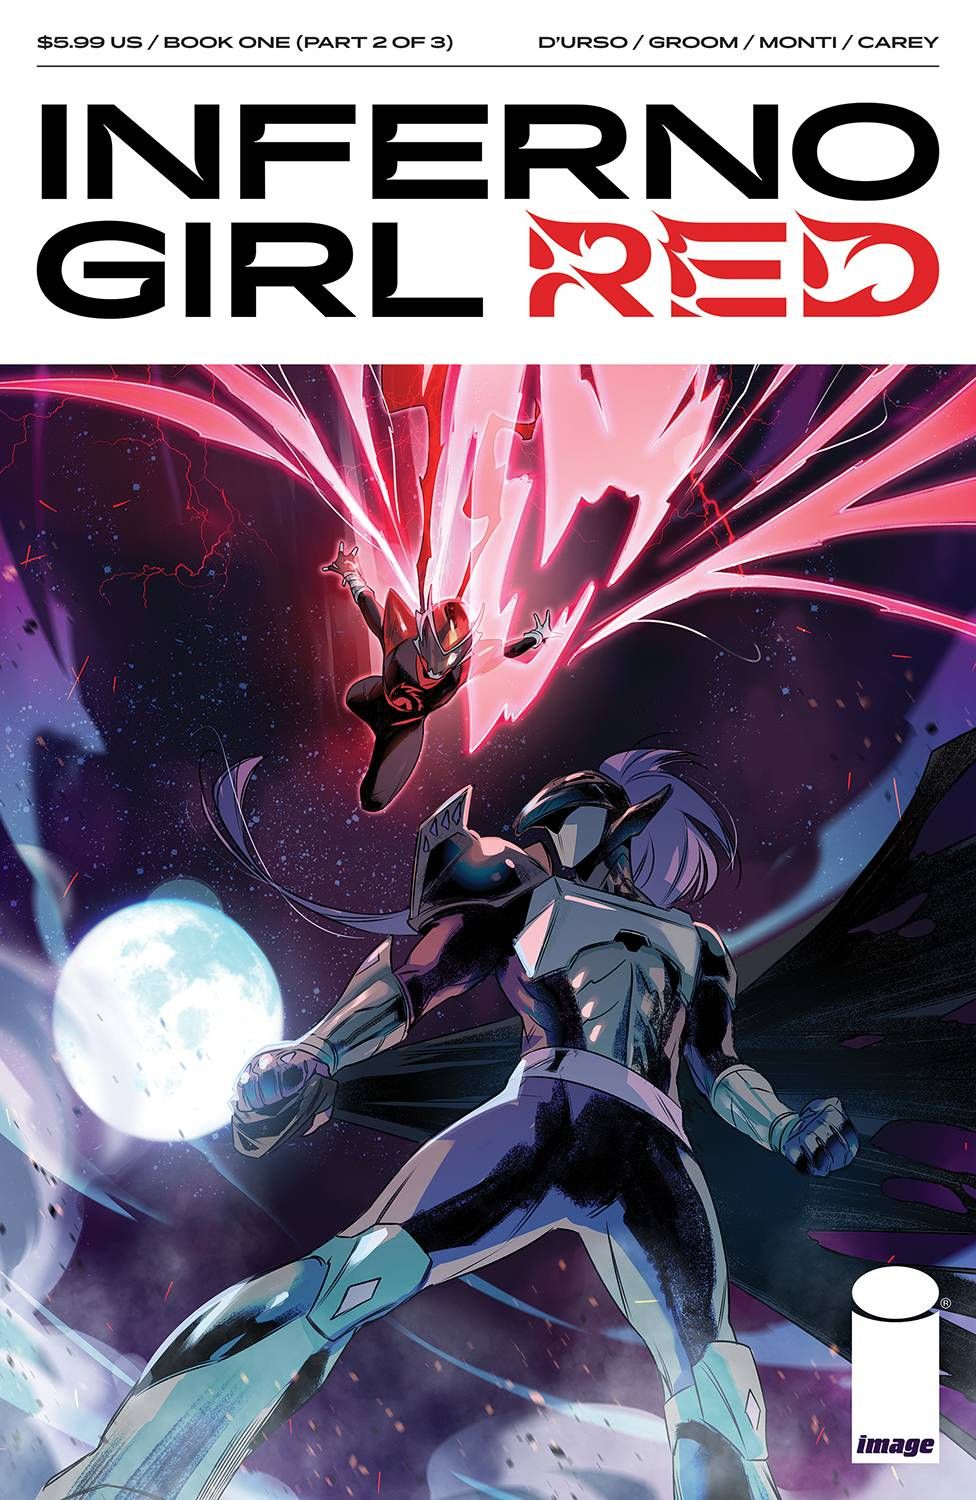 Inferno Girl Red - Book One #2 Comic